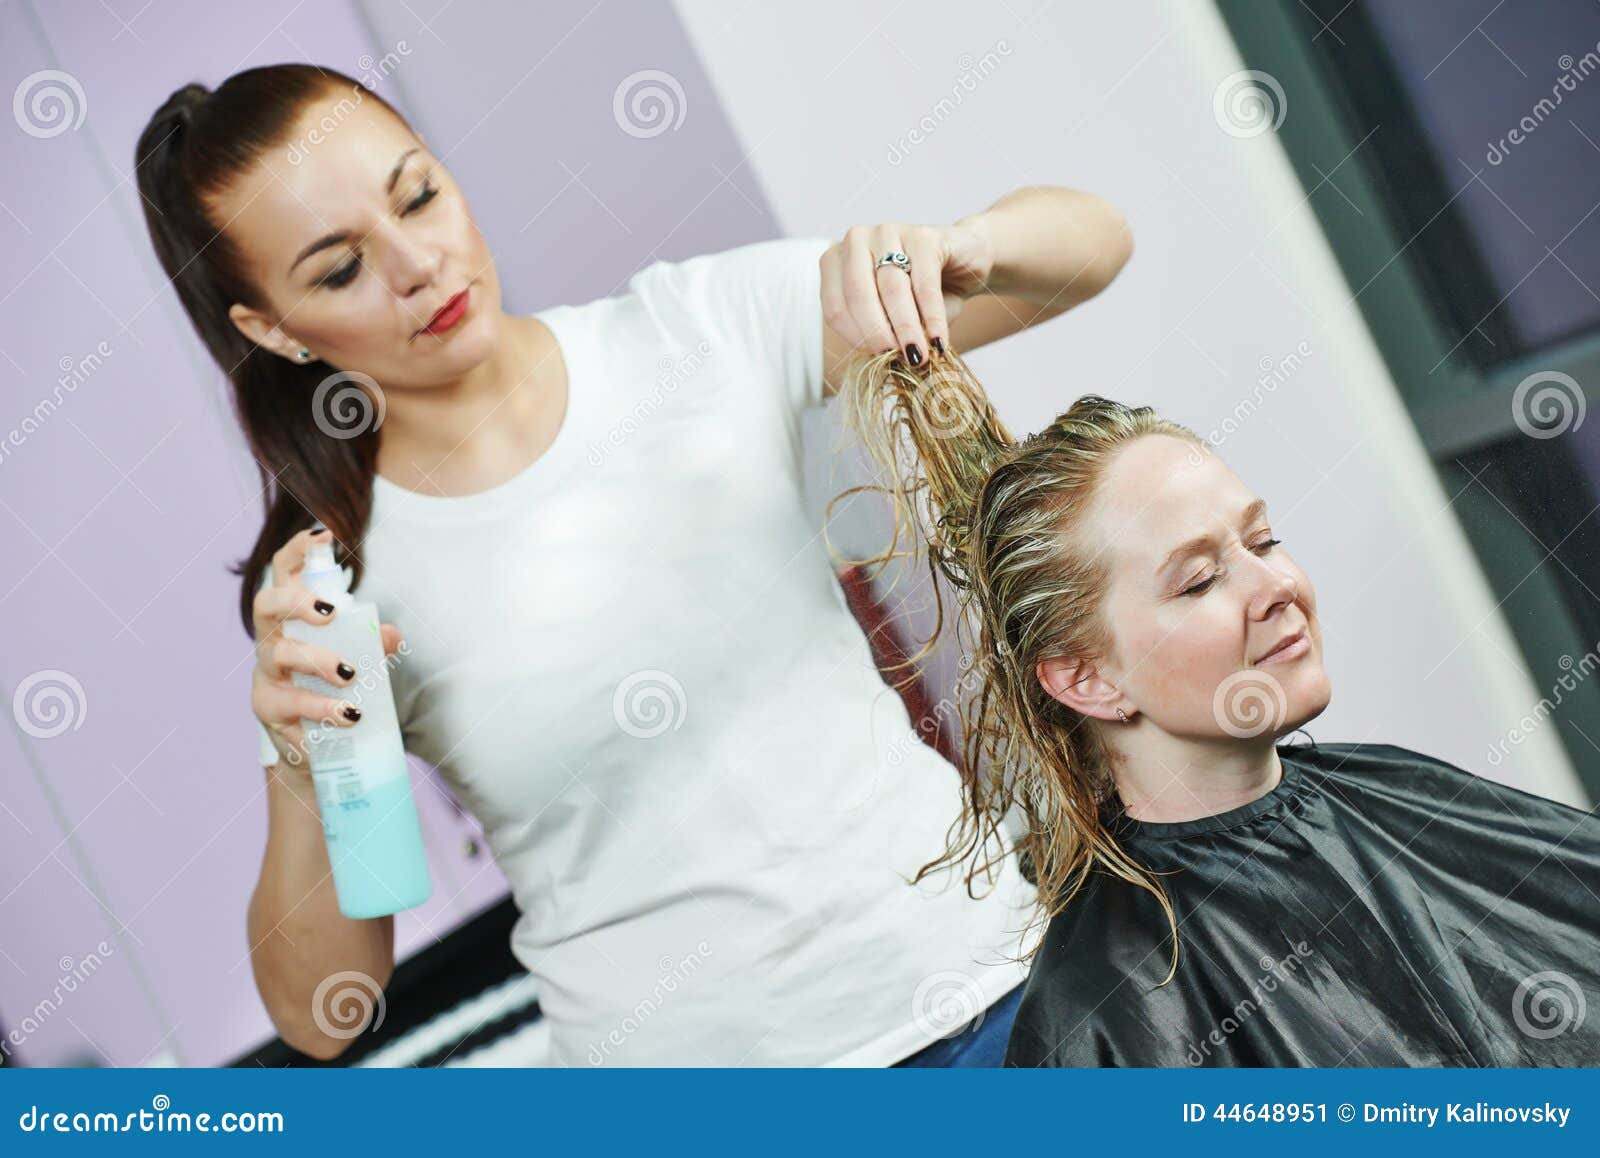 Hairdresser at Work. Styling Hair Stock Image - Image of haircut, business:  44648951